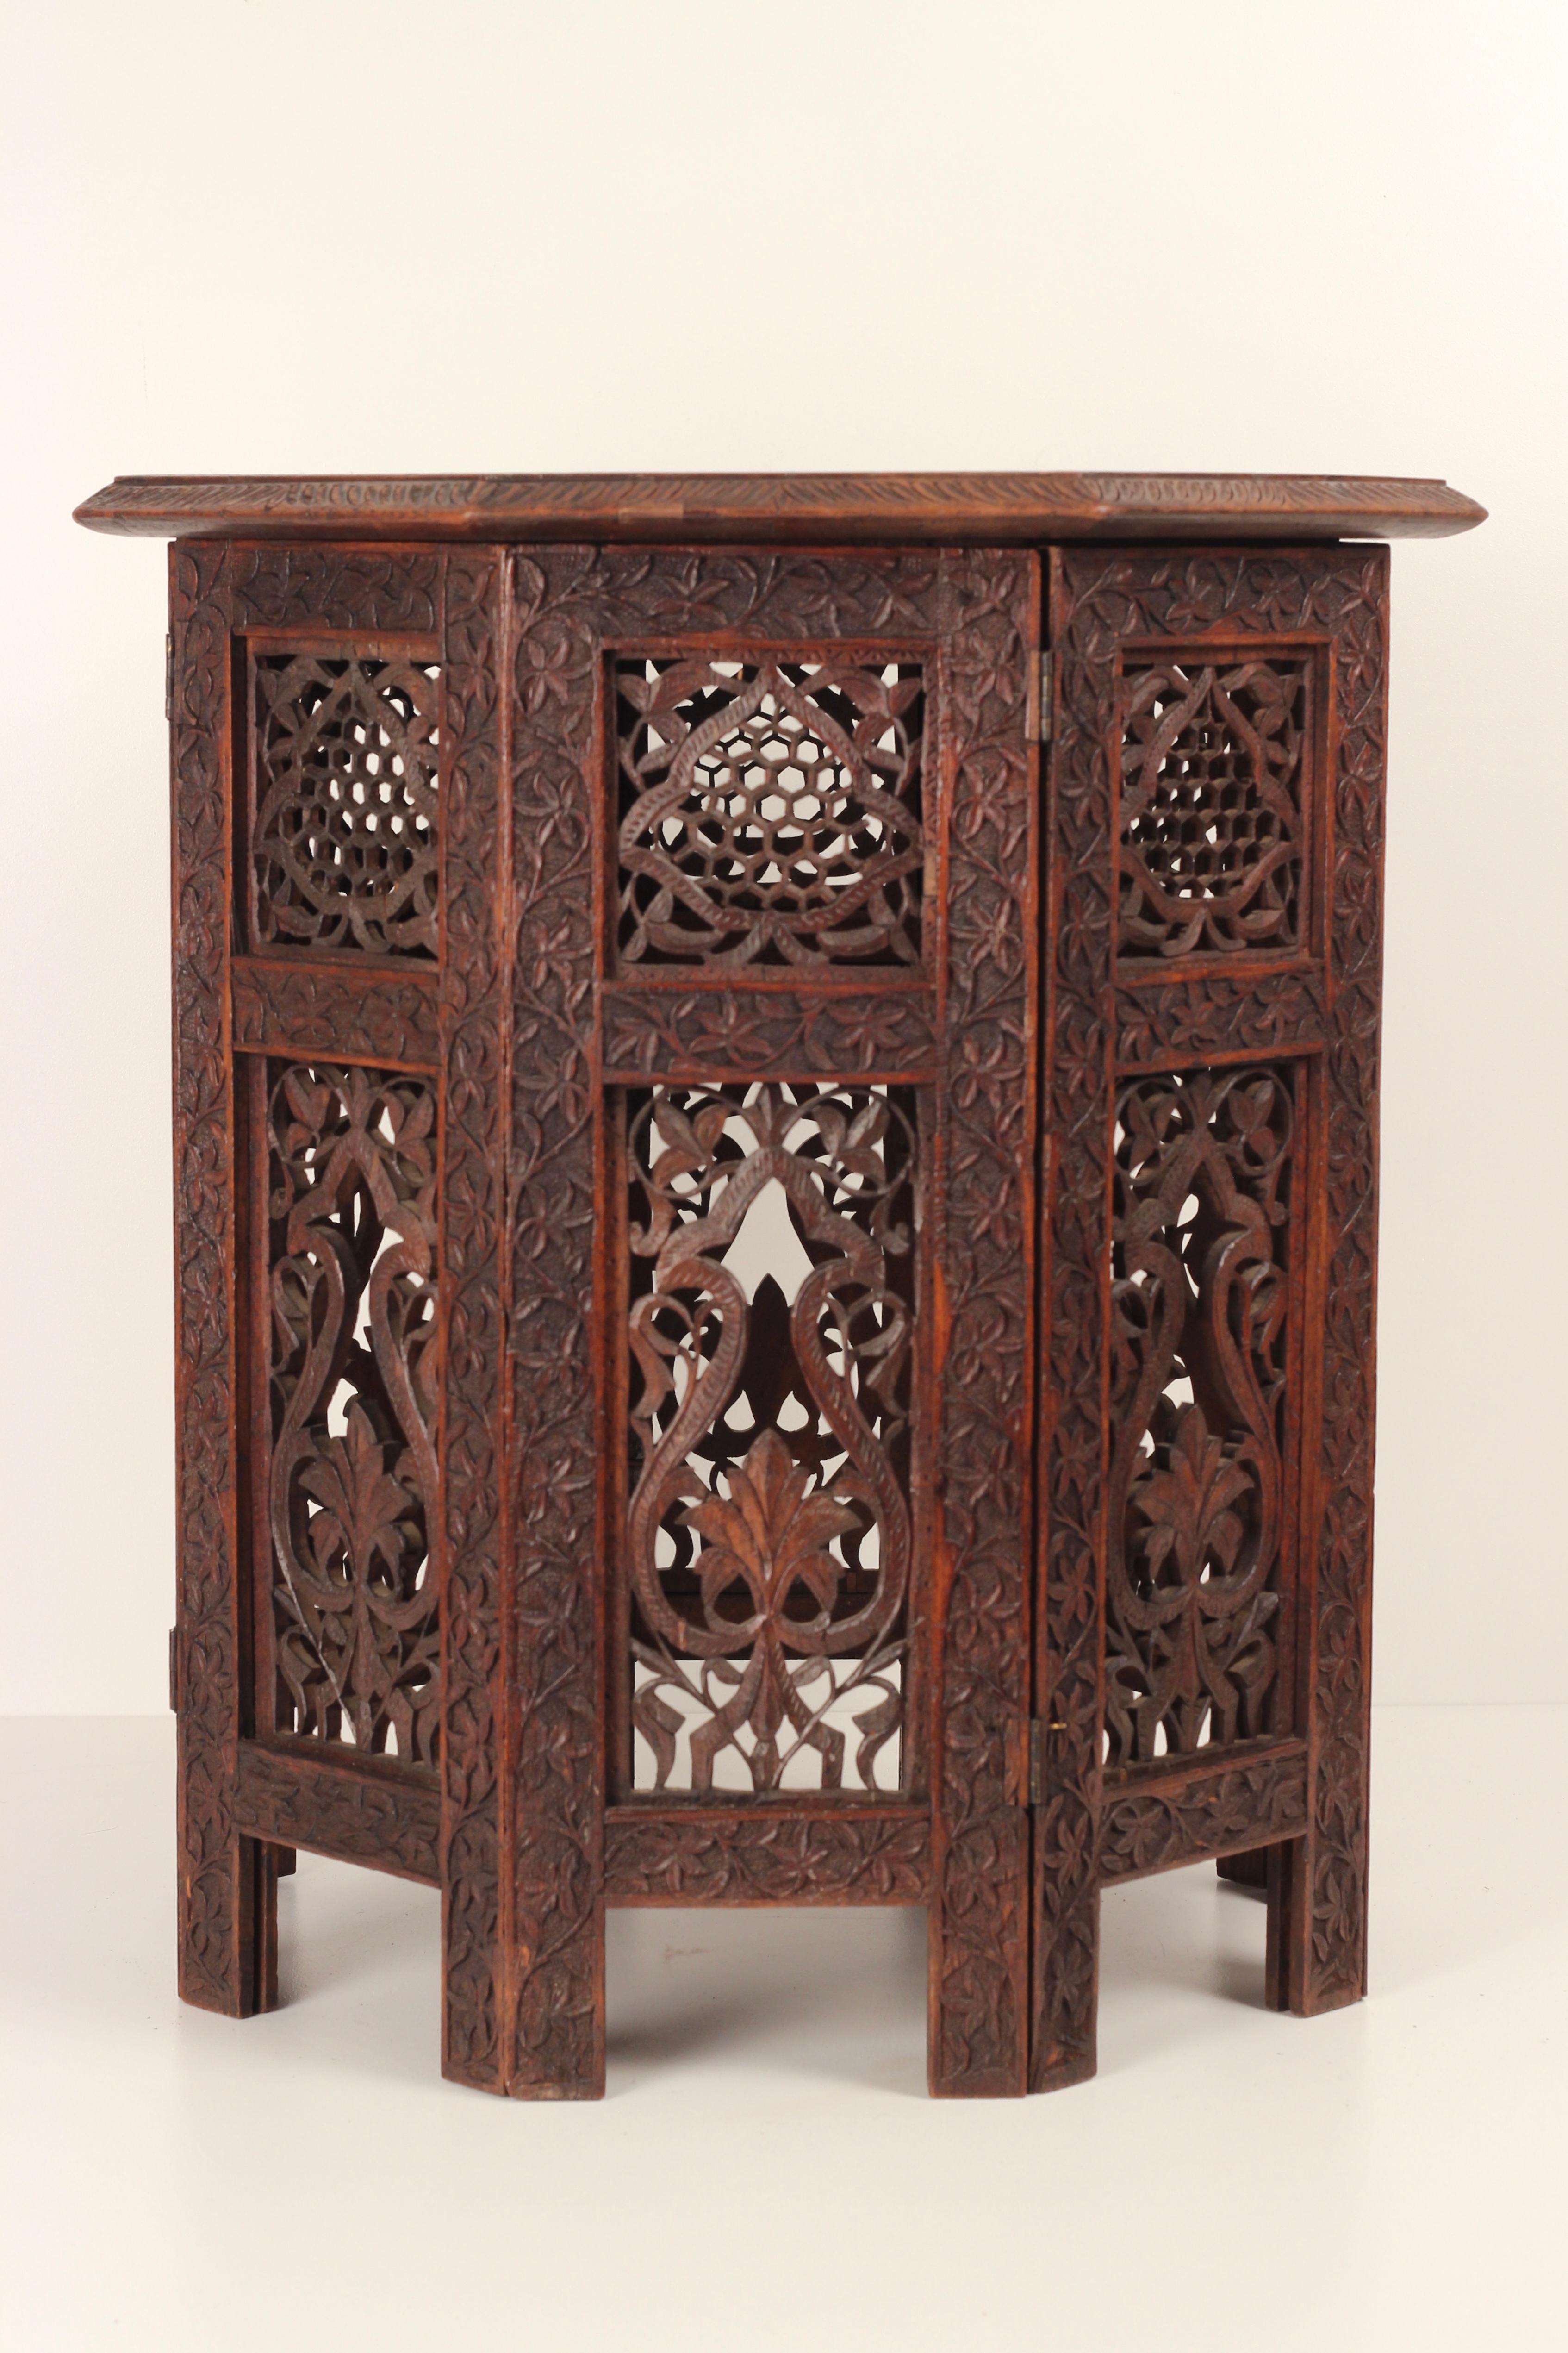 Boho Chic style 19th Century Hand Carved Wooden Moorish Octagonal Table In Good Condition For Sale In London, GB